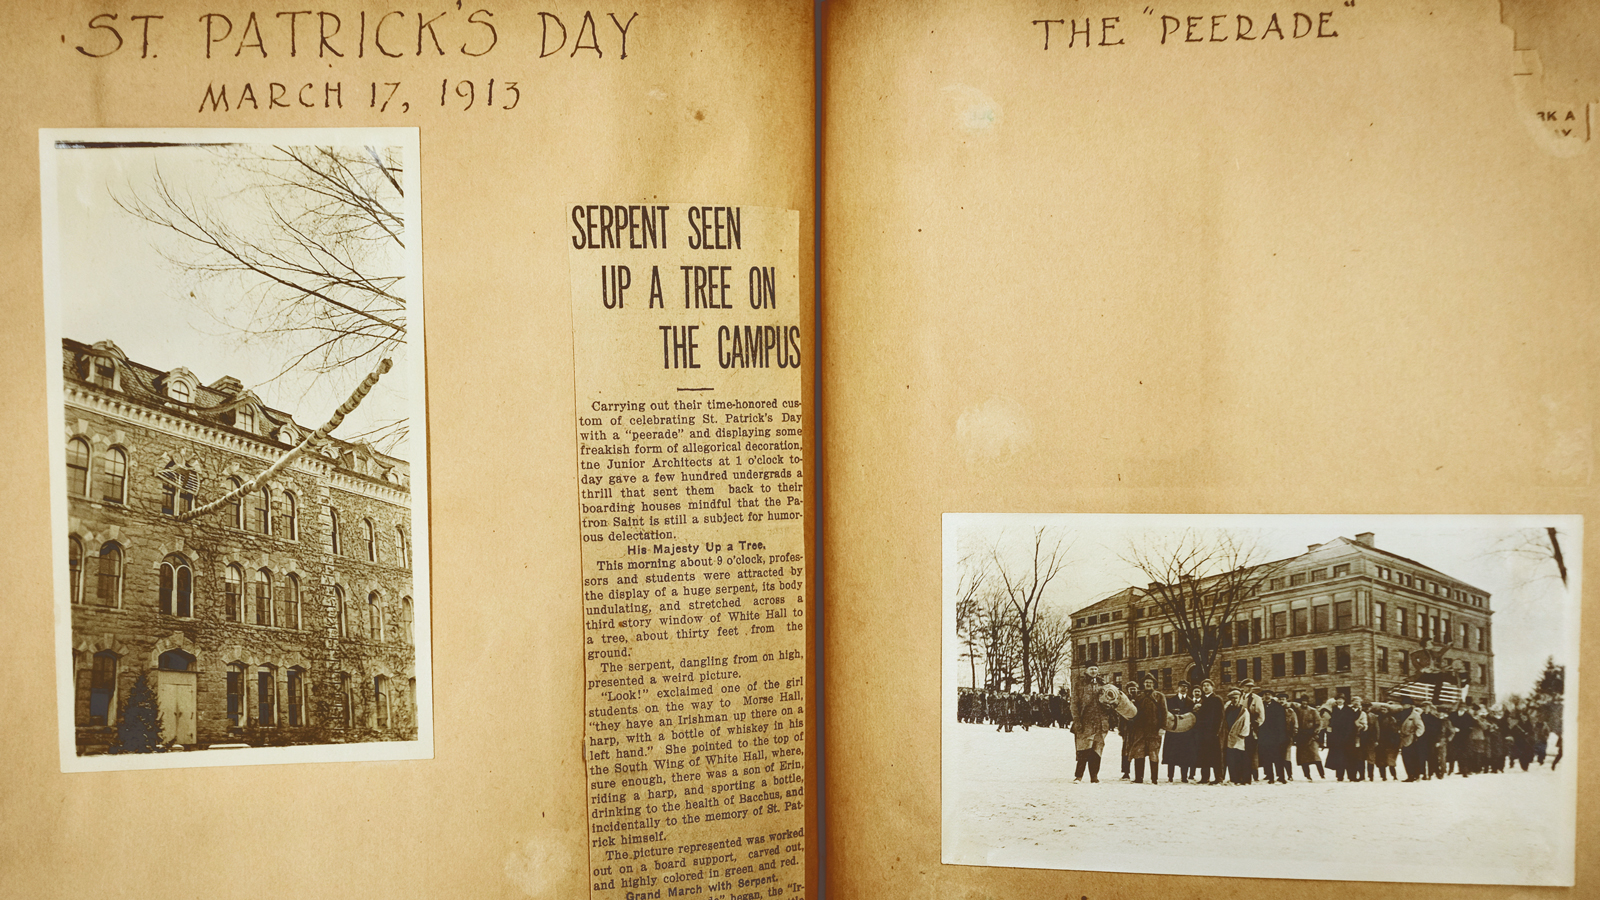 student scrapbook from 1913 include photos and news clipping from St. Patrick's Day events